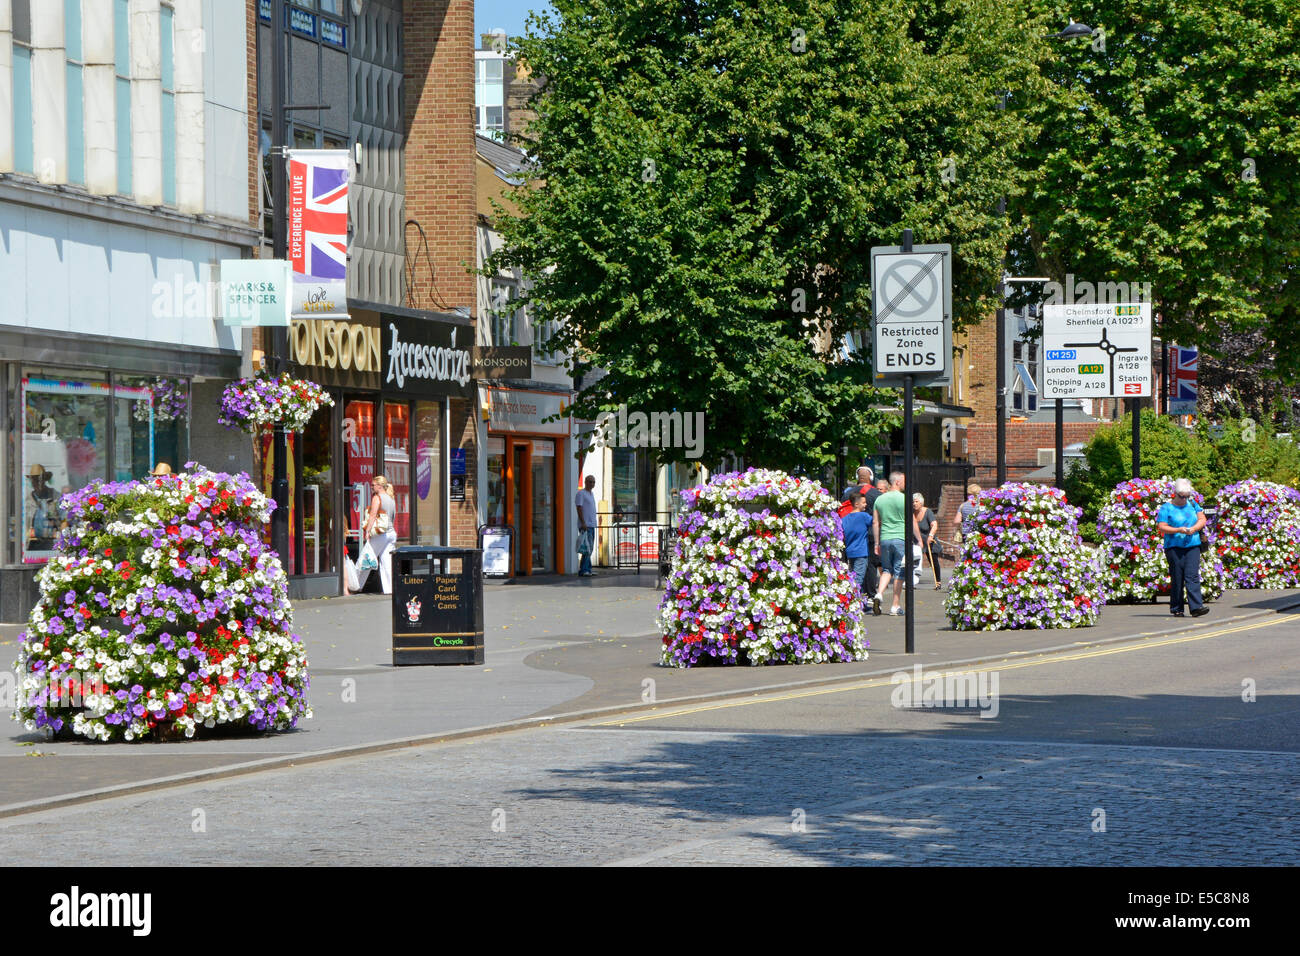 High street shopping area with pavement floral decorations provided by local borough council Stock Photo